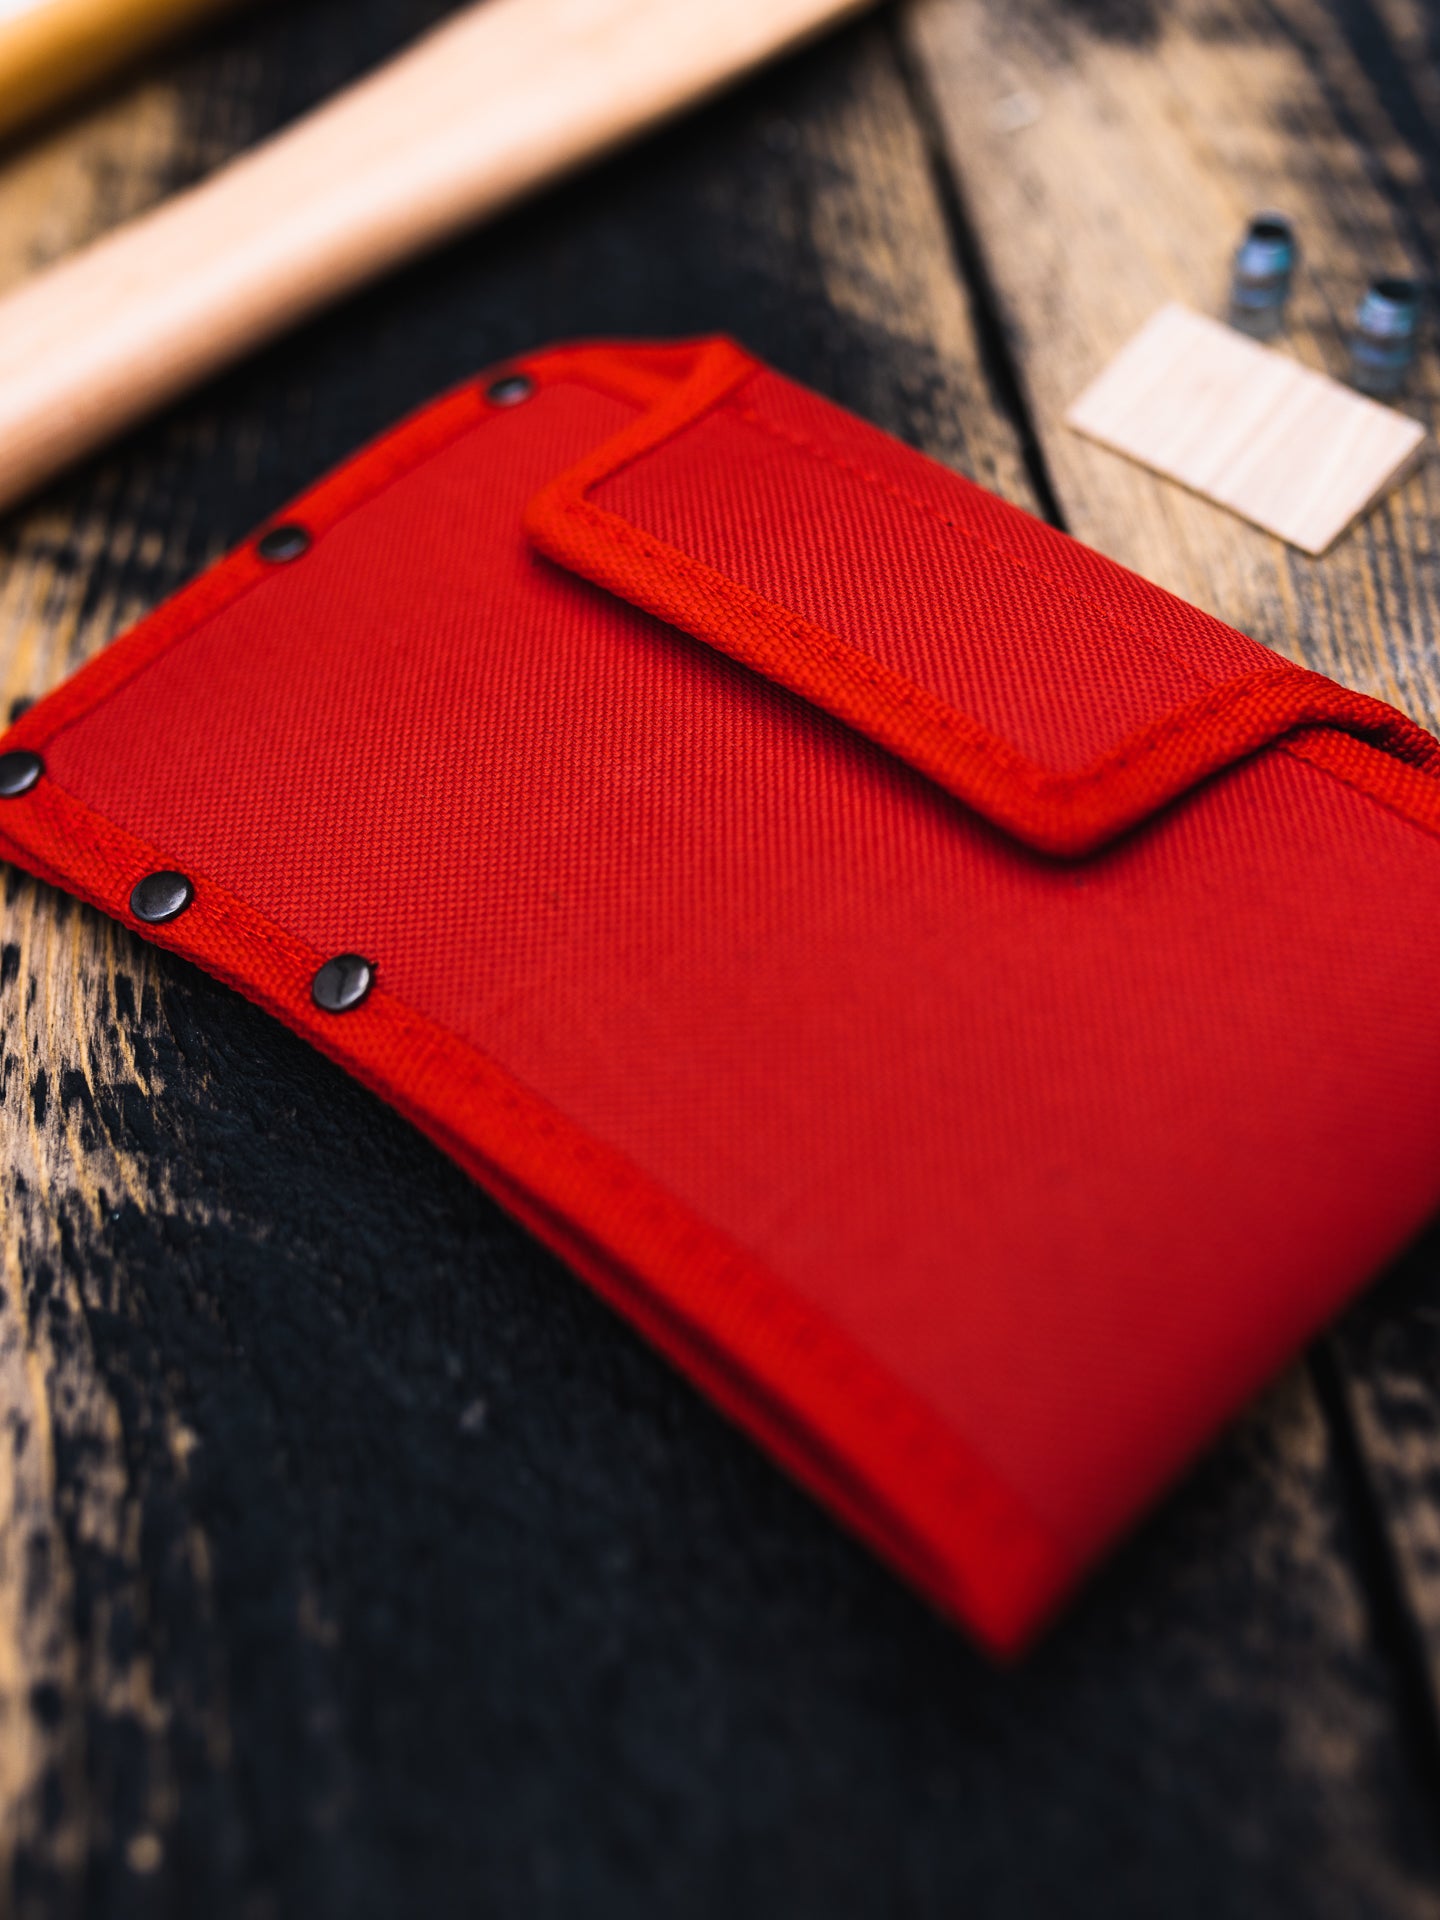 Red nylon sheath for throwing axe